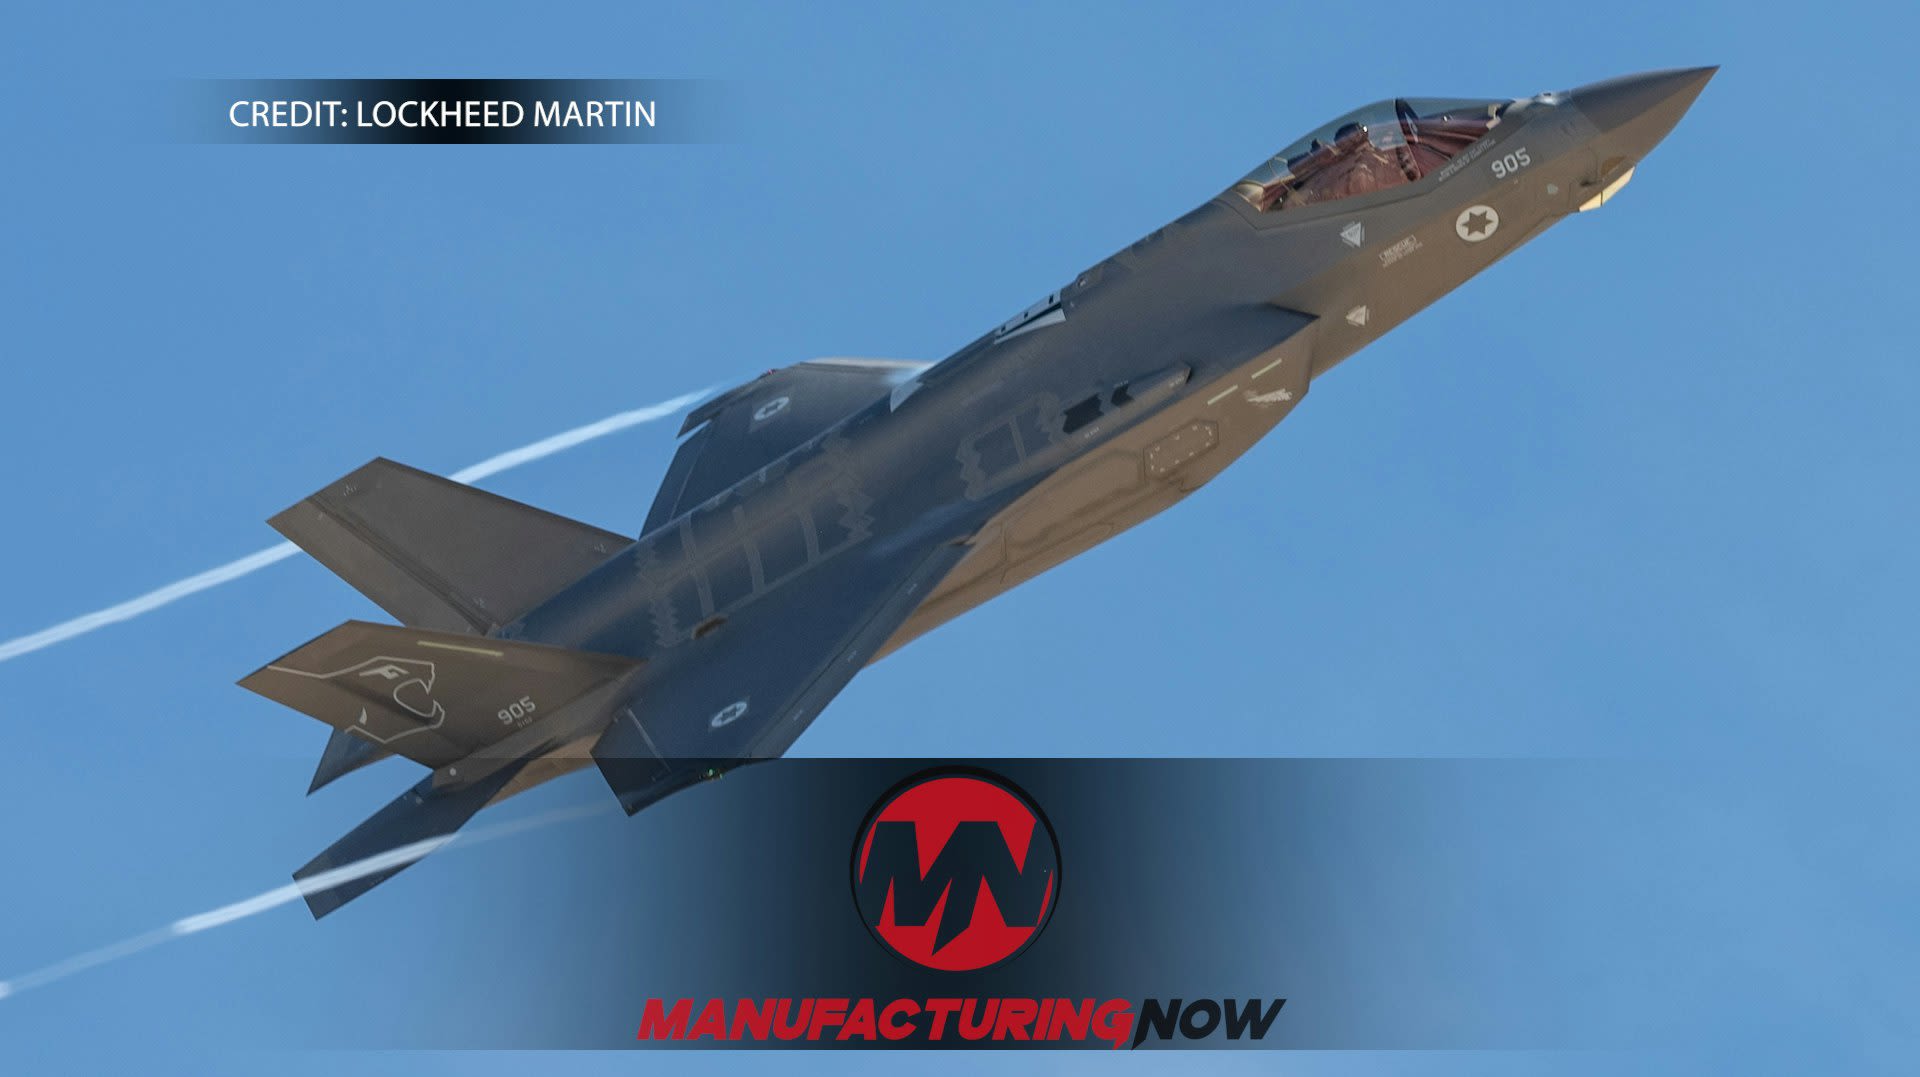 F-35 Crashes After Leaving Lockheed Martin Factory